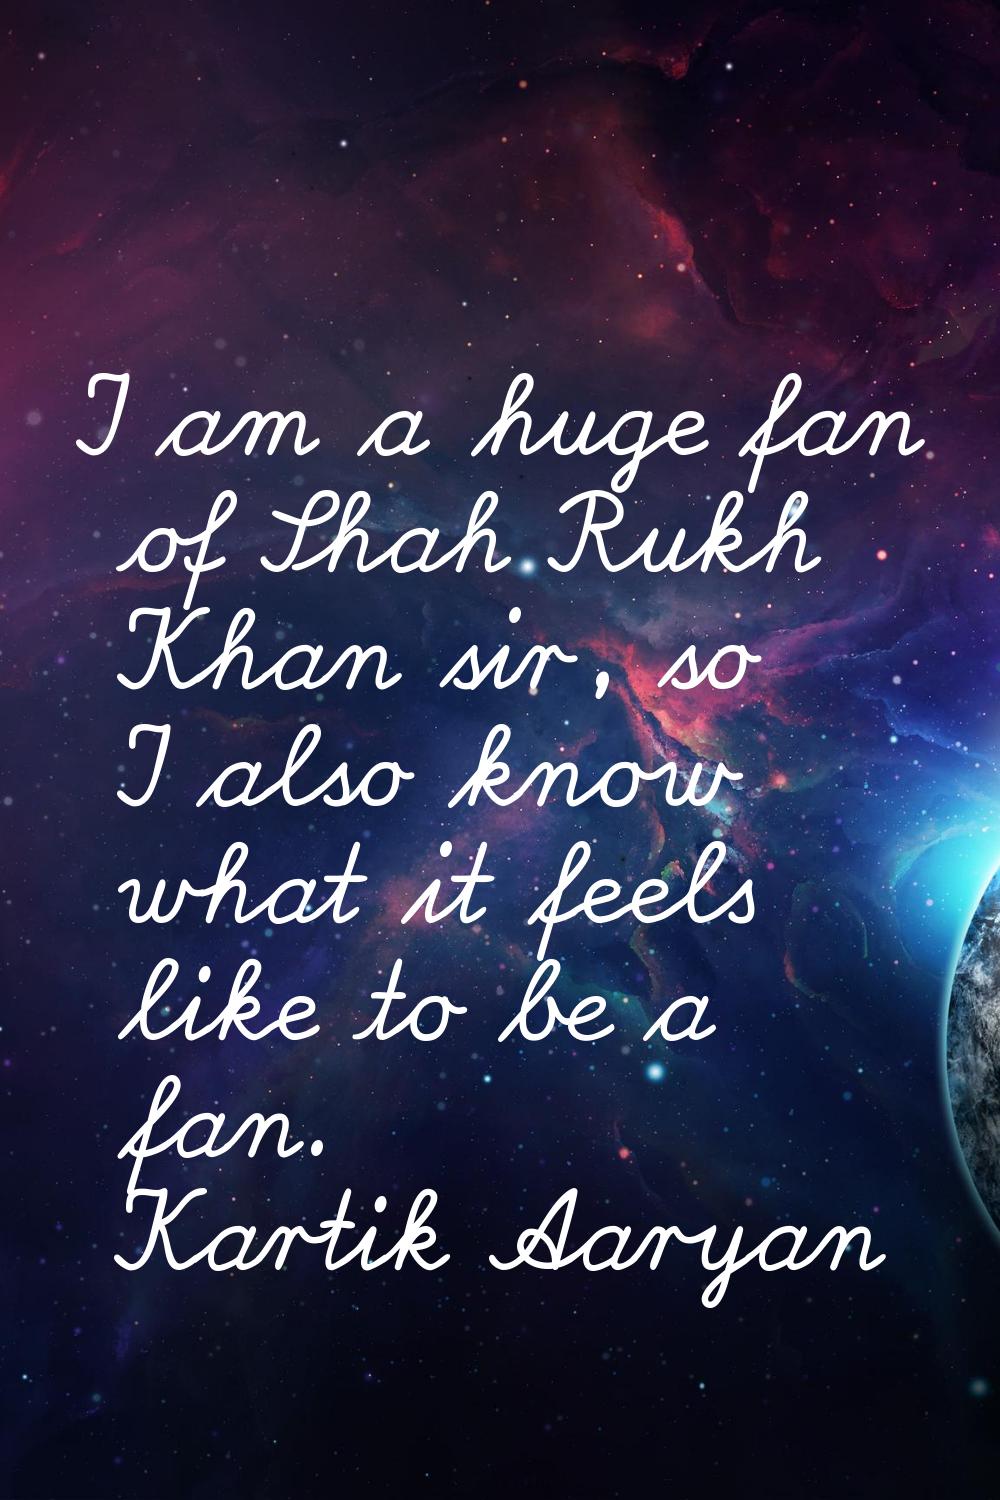 I am a huge fan of Shah Rukh Khan sir, so I also know what it feels like to be a fan.